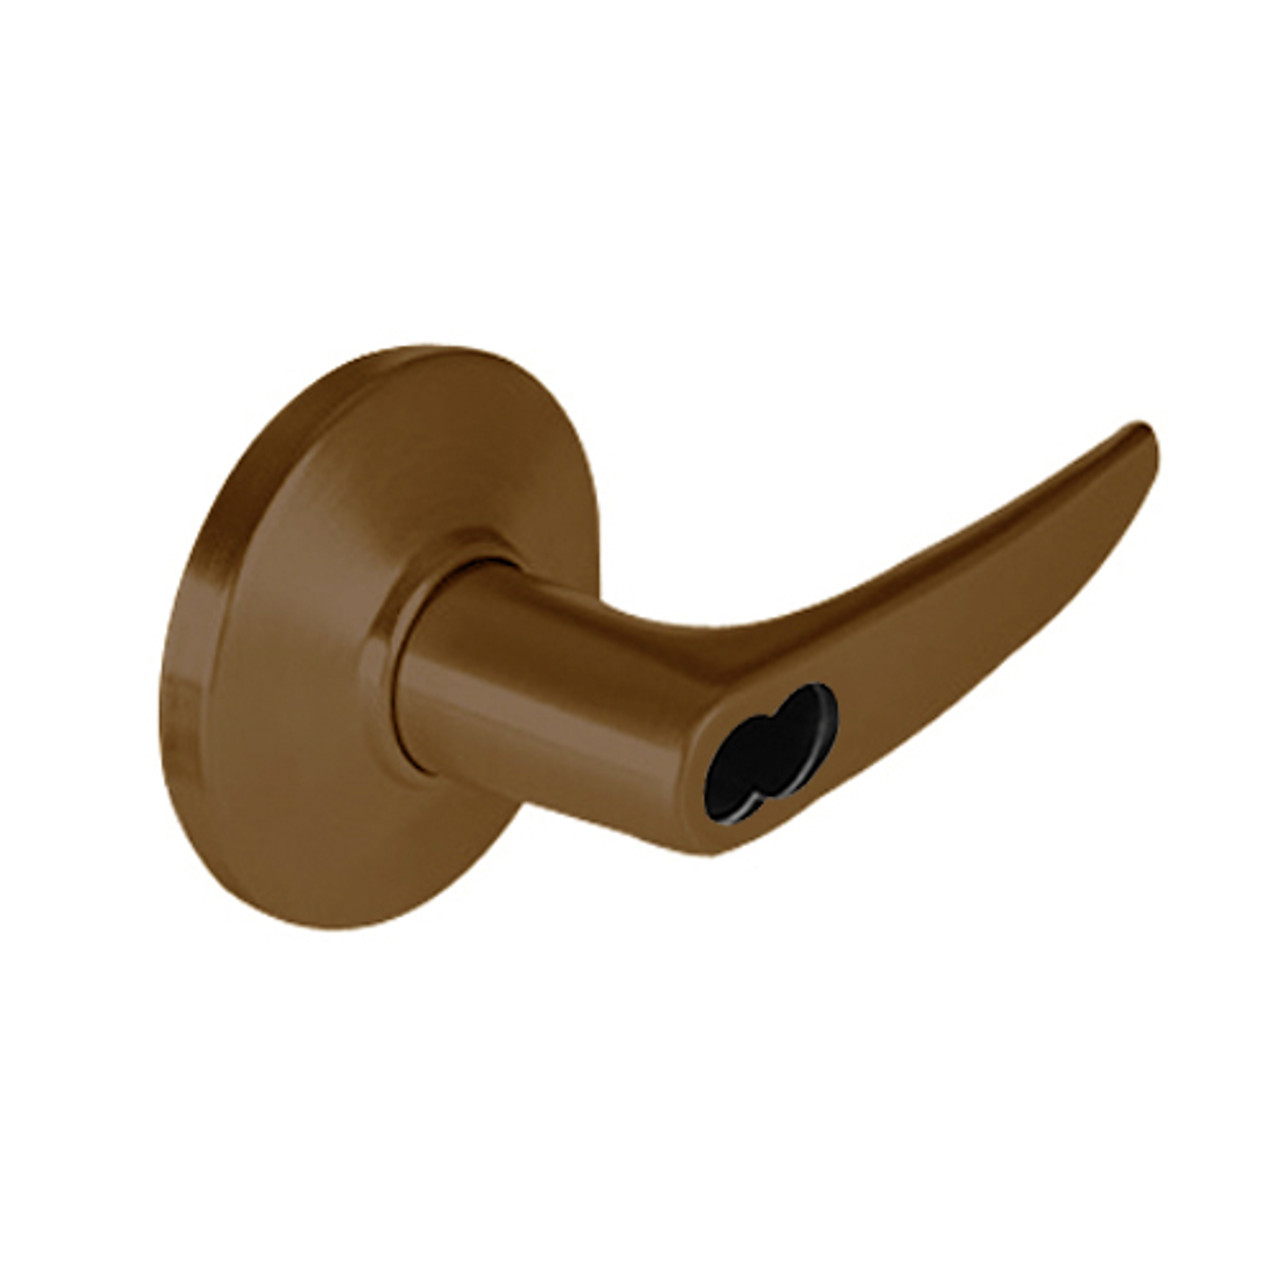 9K37DR16DSTK690 Best 9K Series Special Function Cylindrical Lever Locks with Curved without Return Lever Design Accept 7 Pin Best Core in Dark Bronze